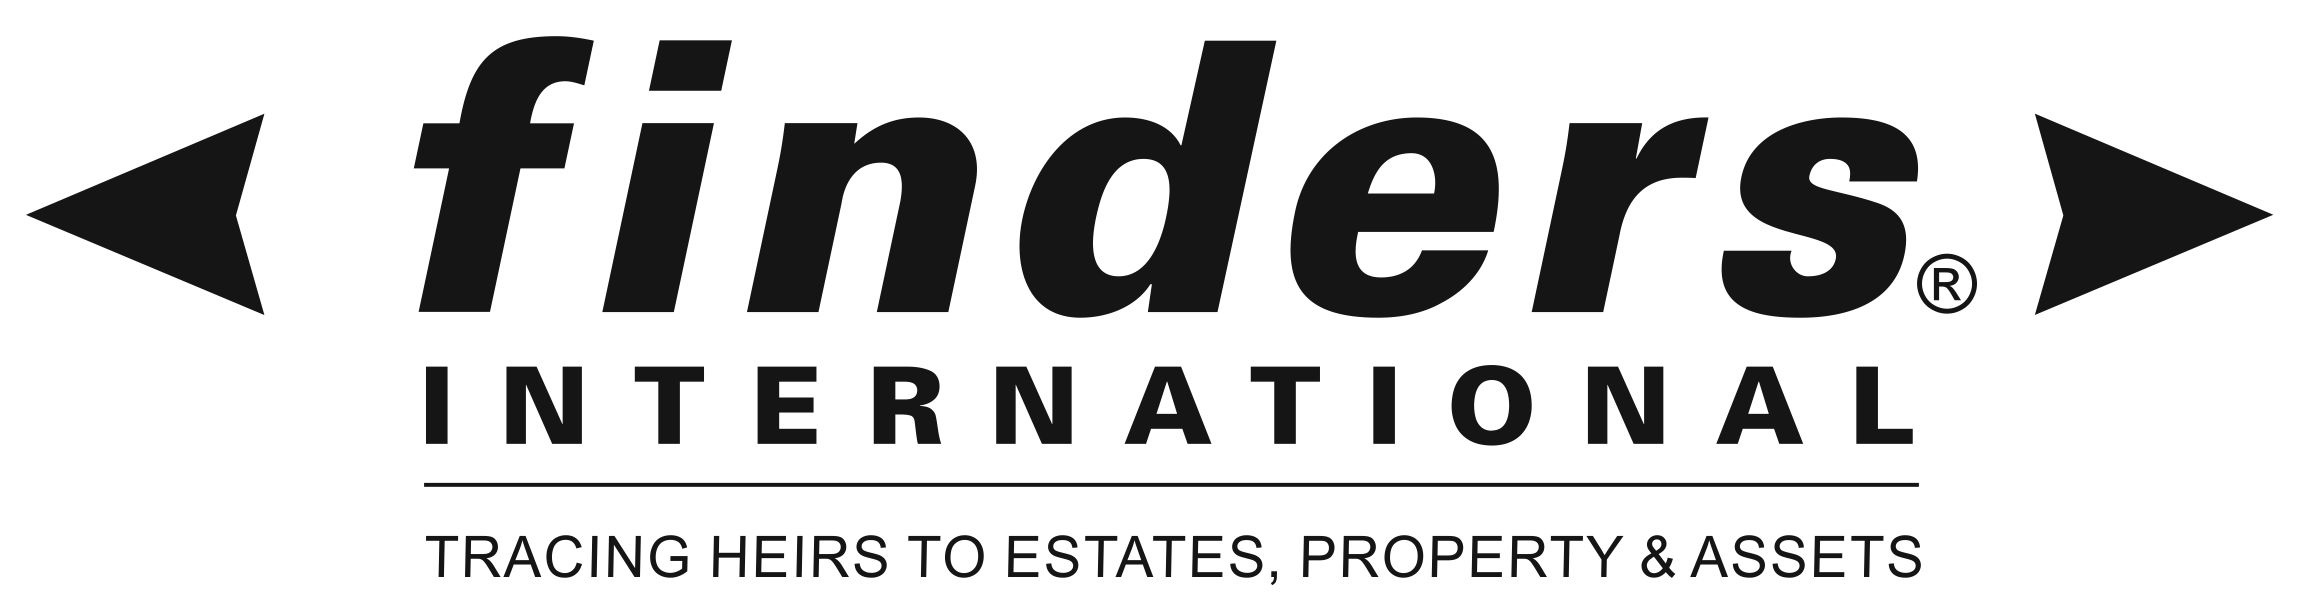 Company logo image - Finders Genealogists T/A Finders International